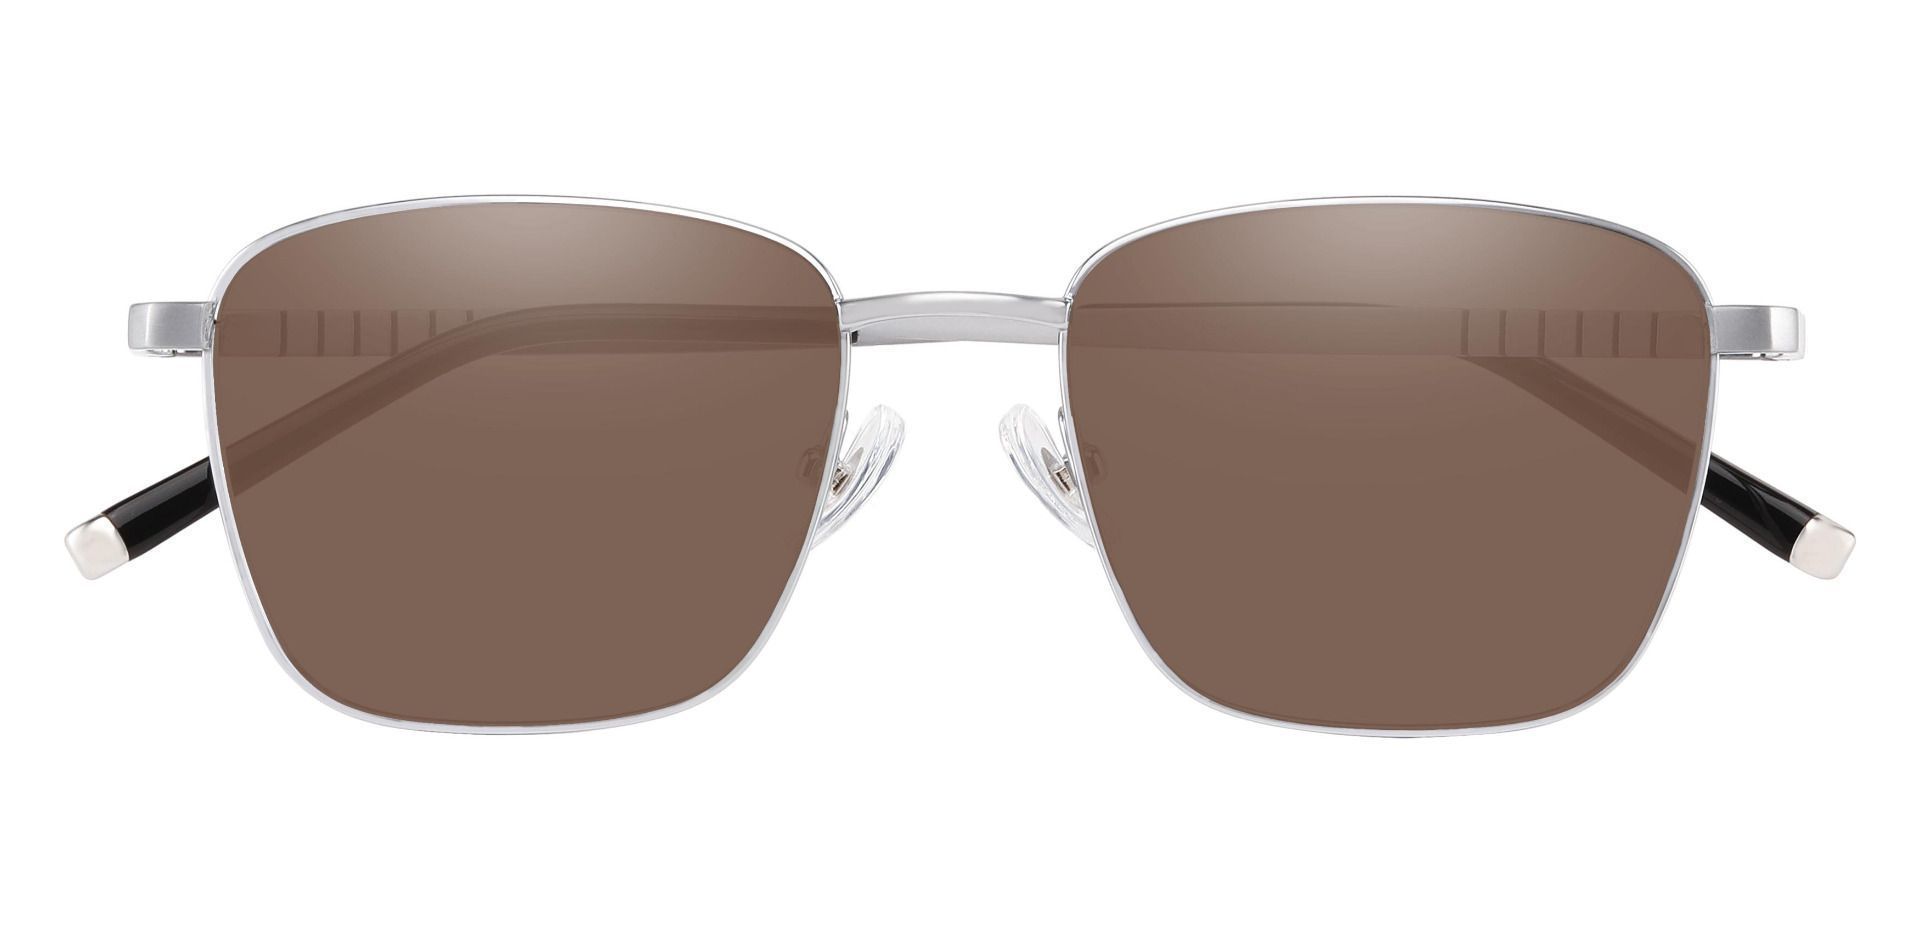 May Square Lined Bifocal Sunglasses - Silver Frame With Brown Lenses